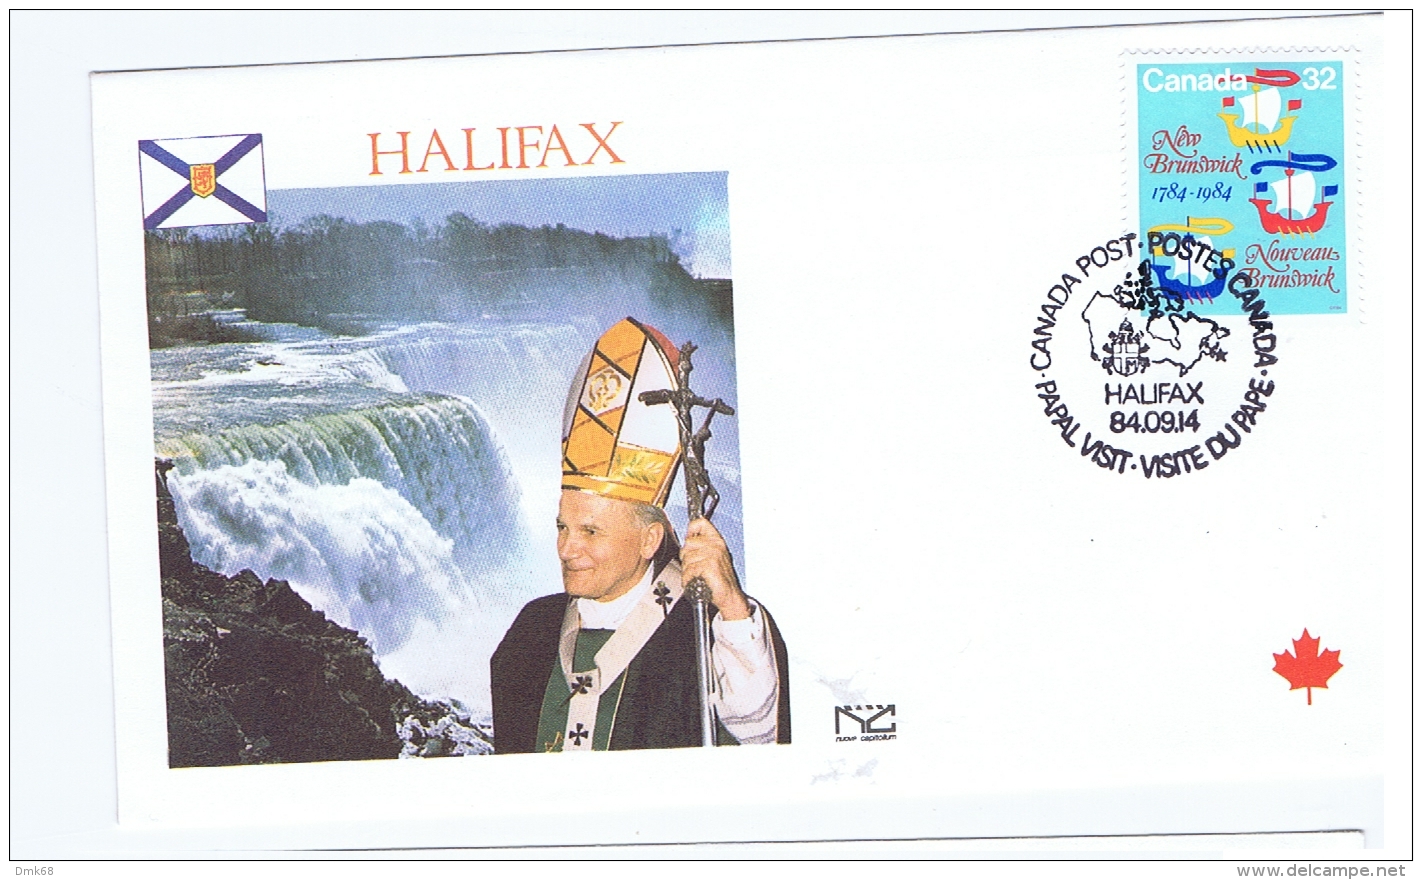 CANADA - HALIFAX - POPE JOHN PAUL?VISIT - FIRST DAY OF ISSUE - 1984 - 1981-1990